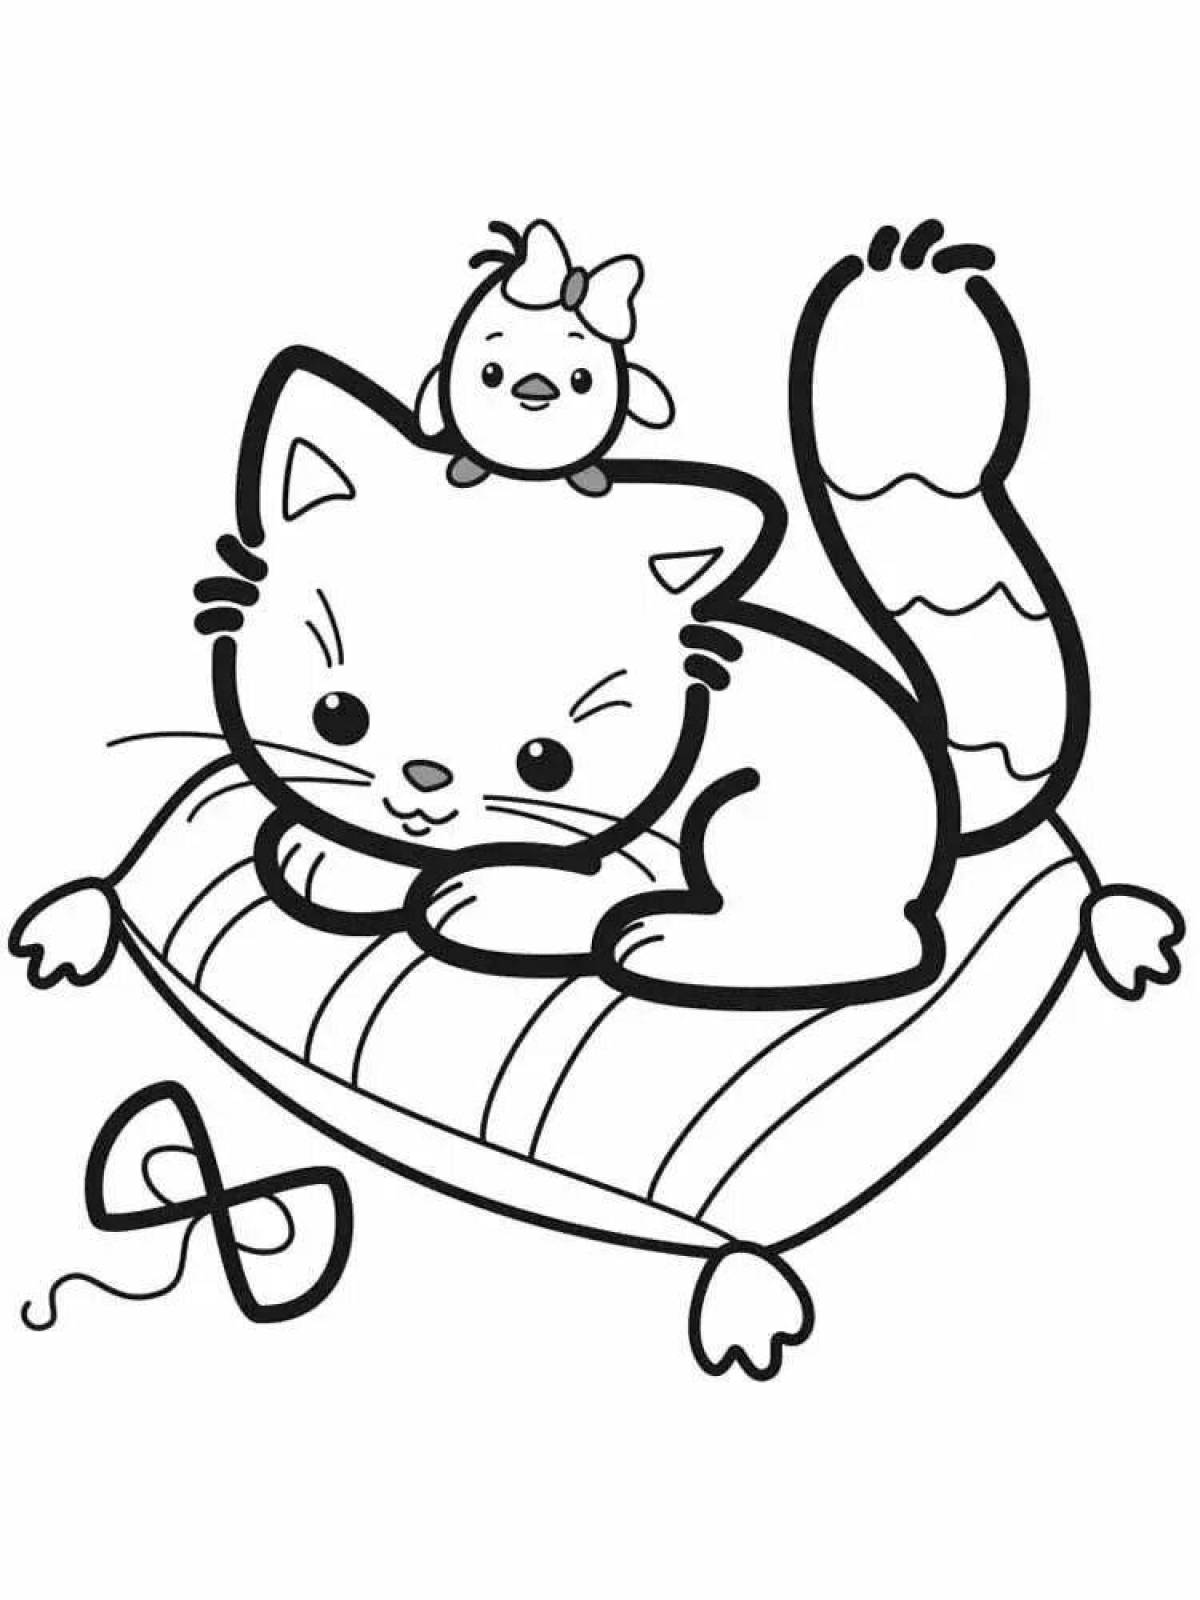 Coloring book funny kitten